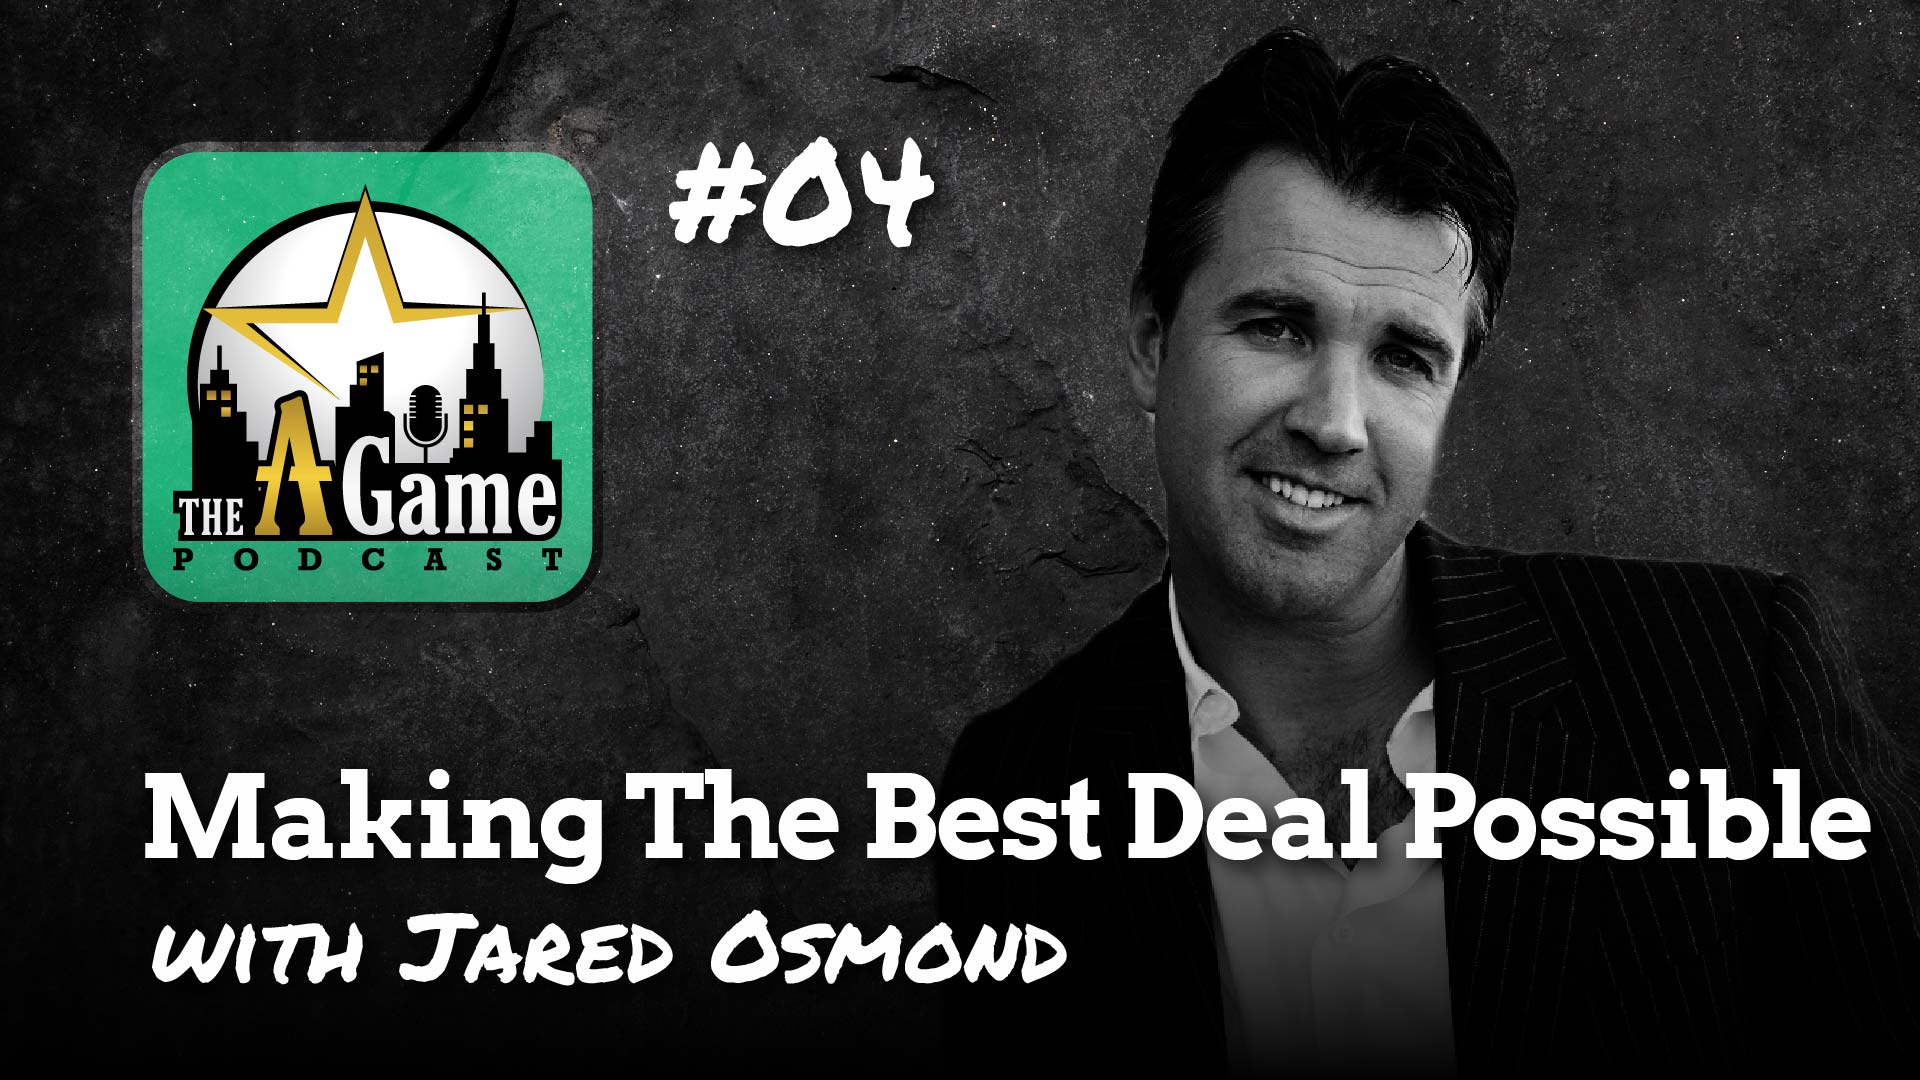 Making the best deal possible with Jared Osmond